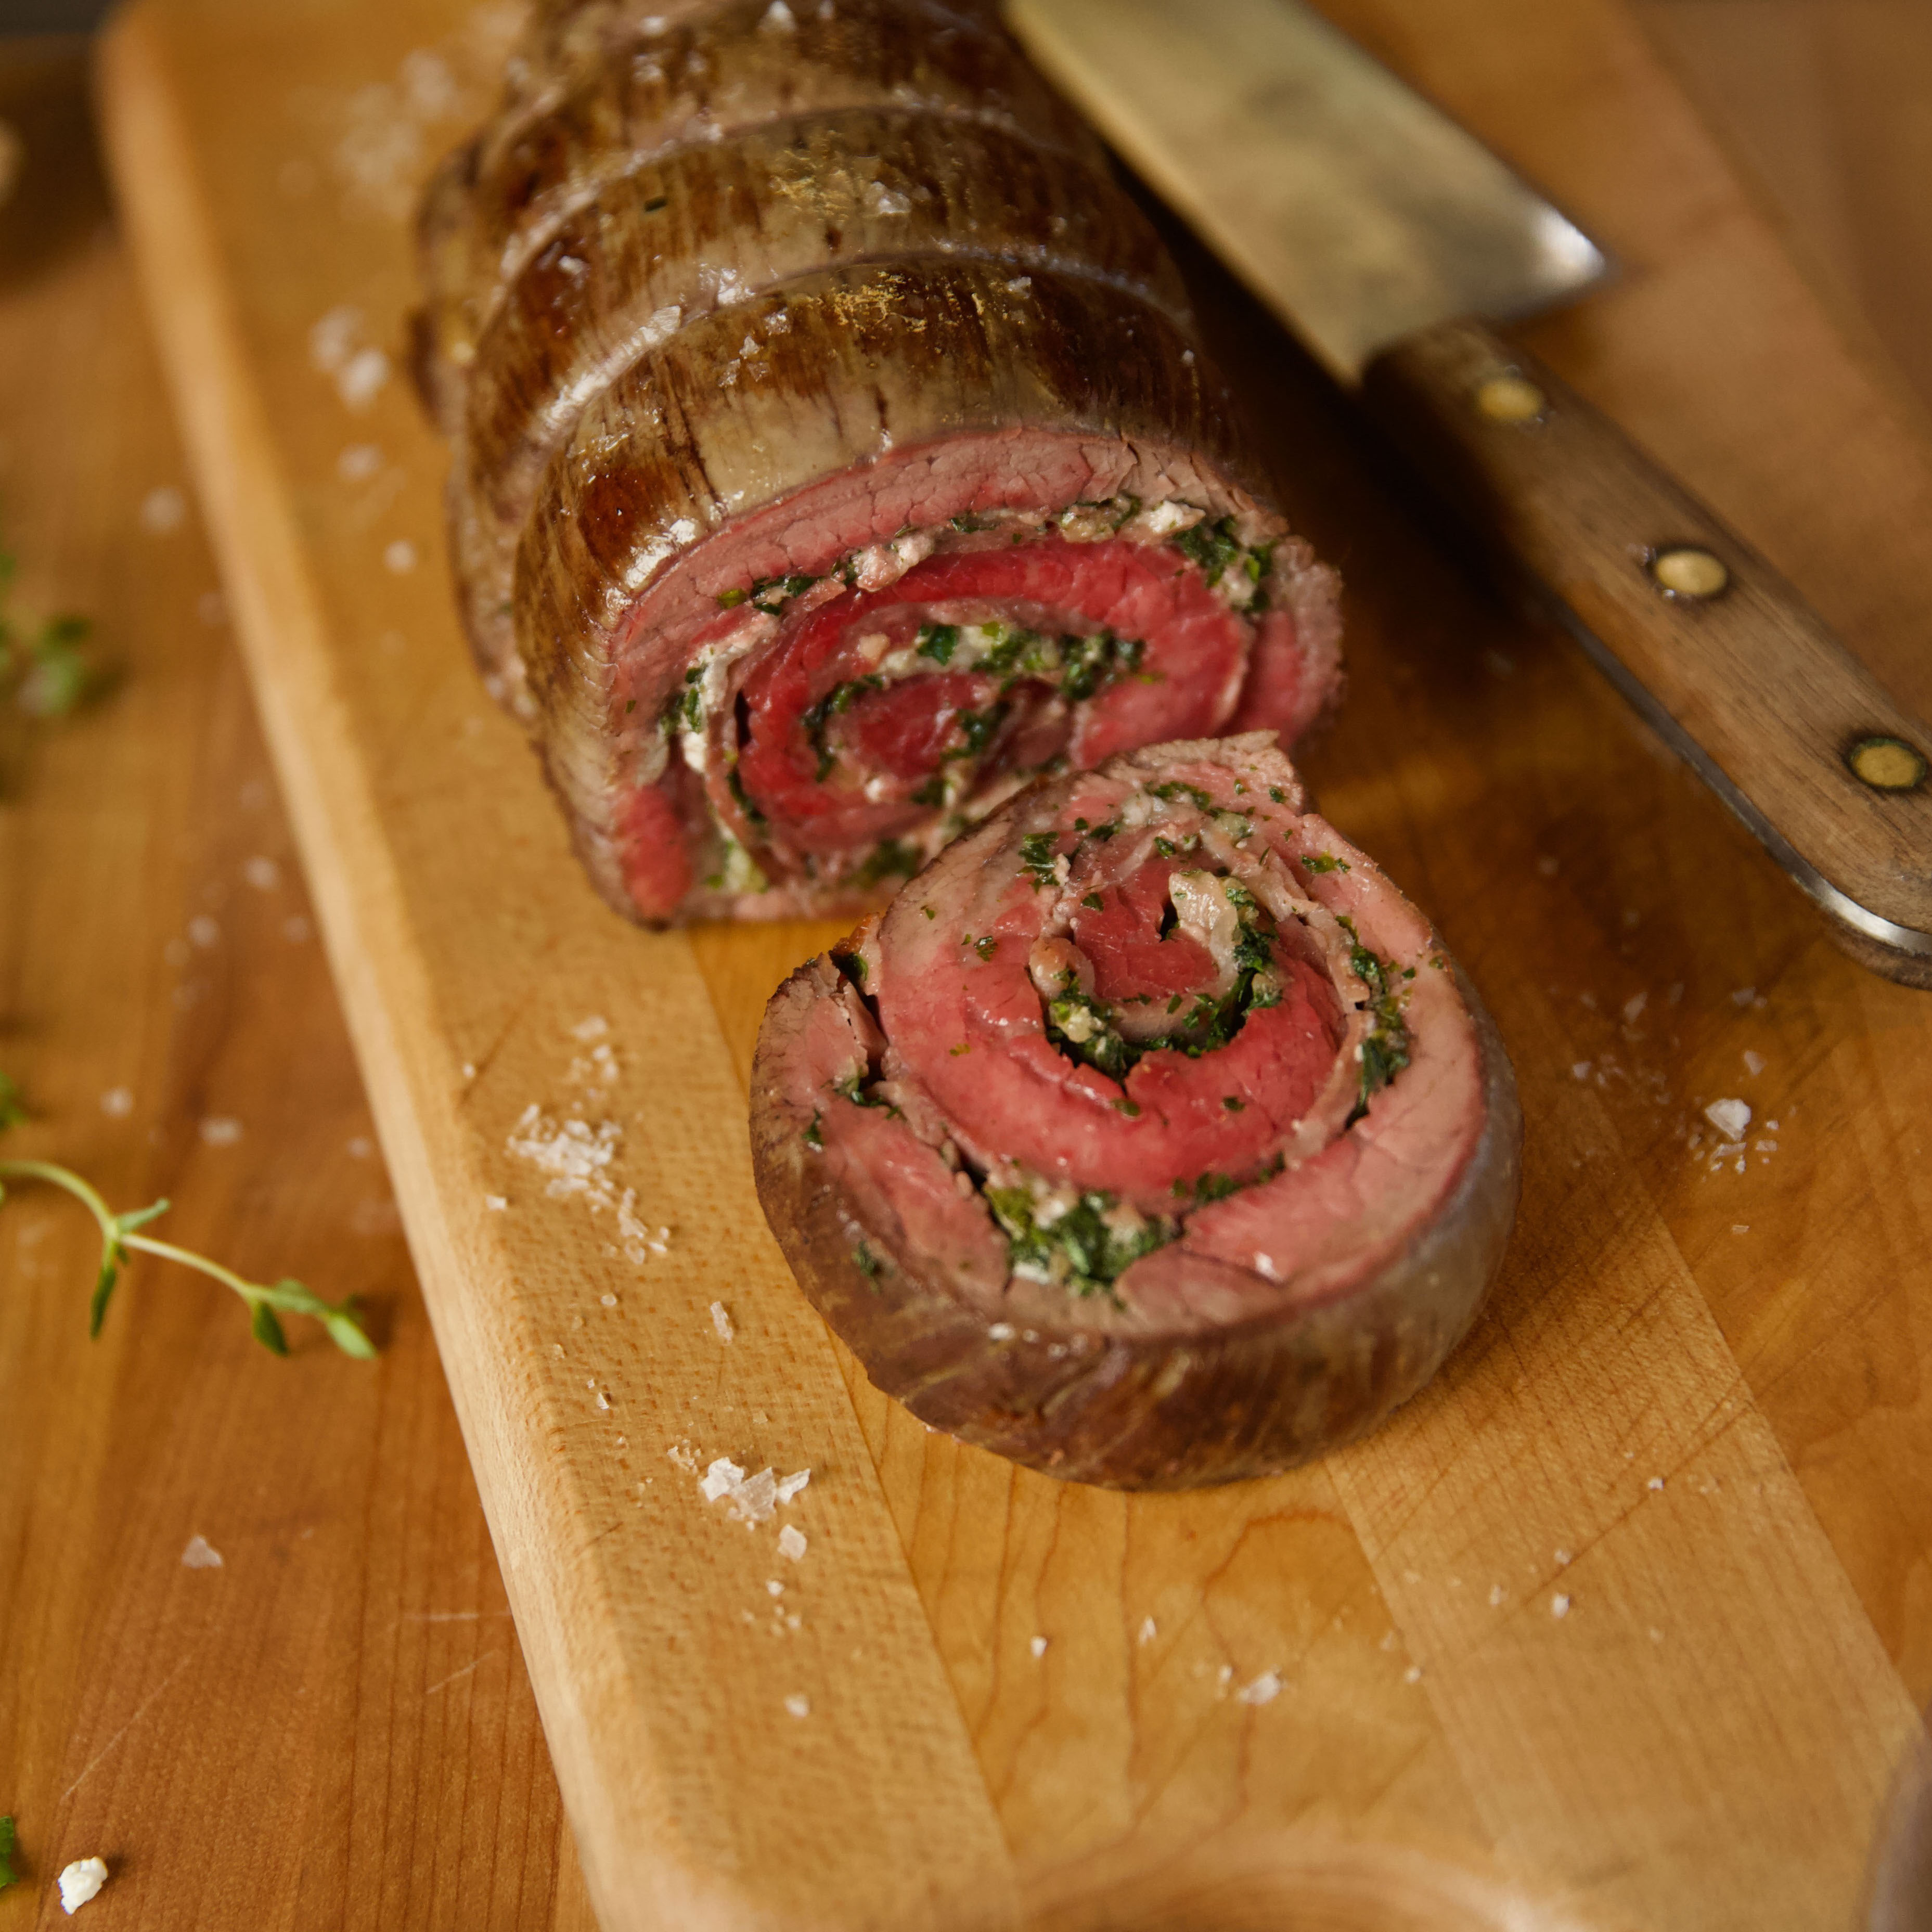 Elizabeth Poett's Rolled Flank Steak with Goat Cheese and Herbs